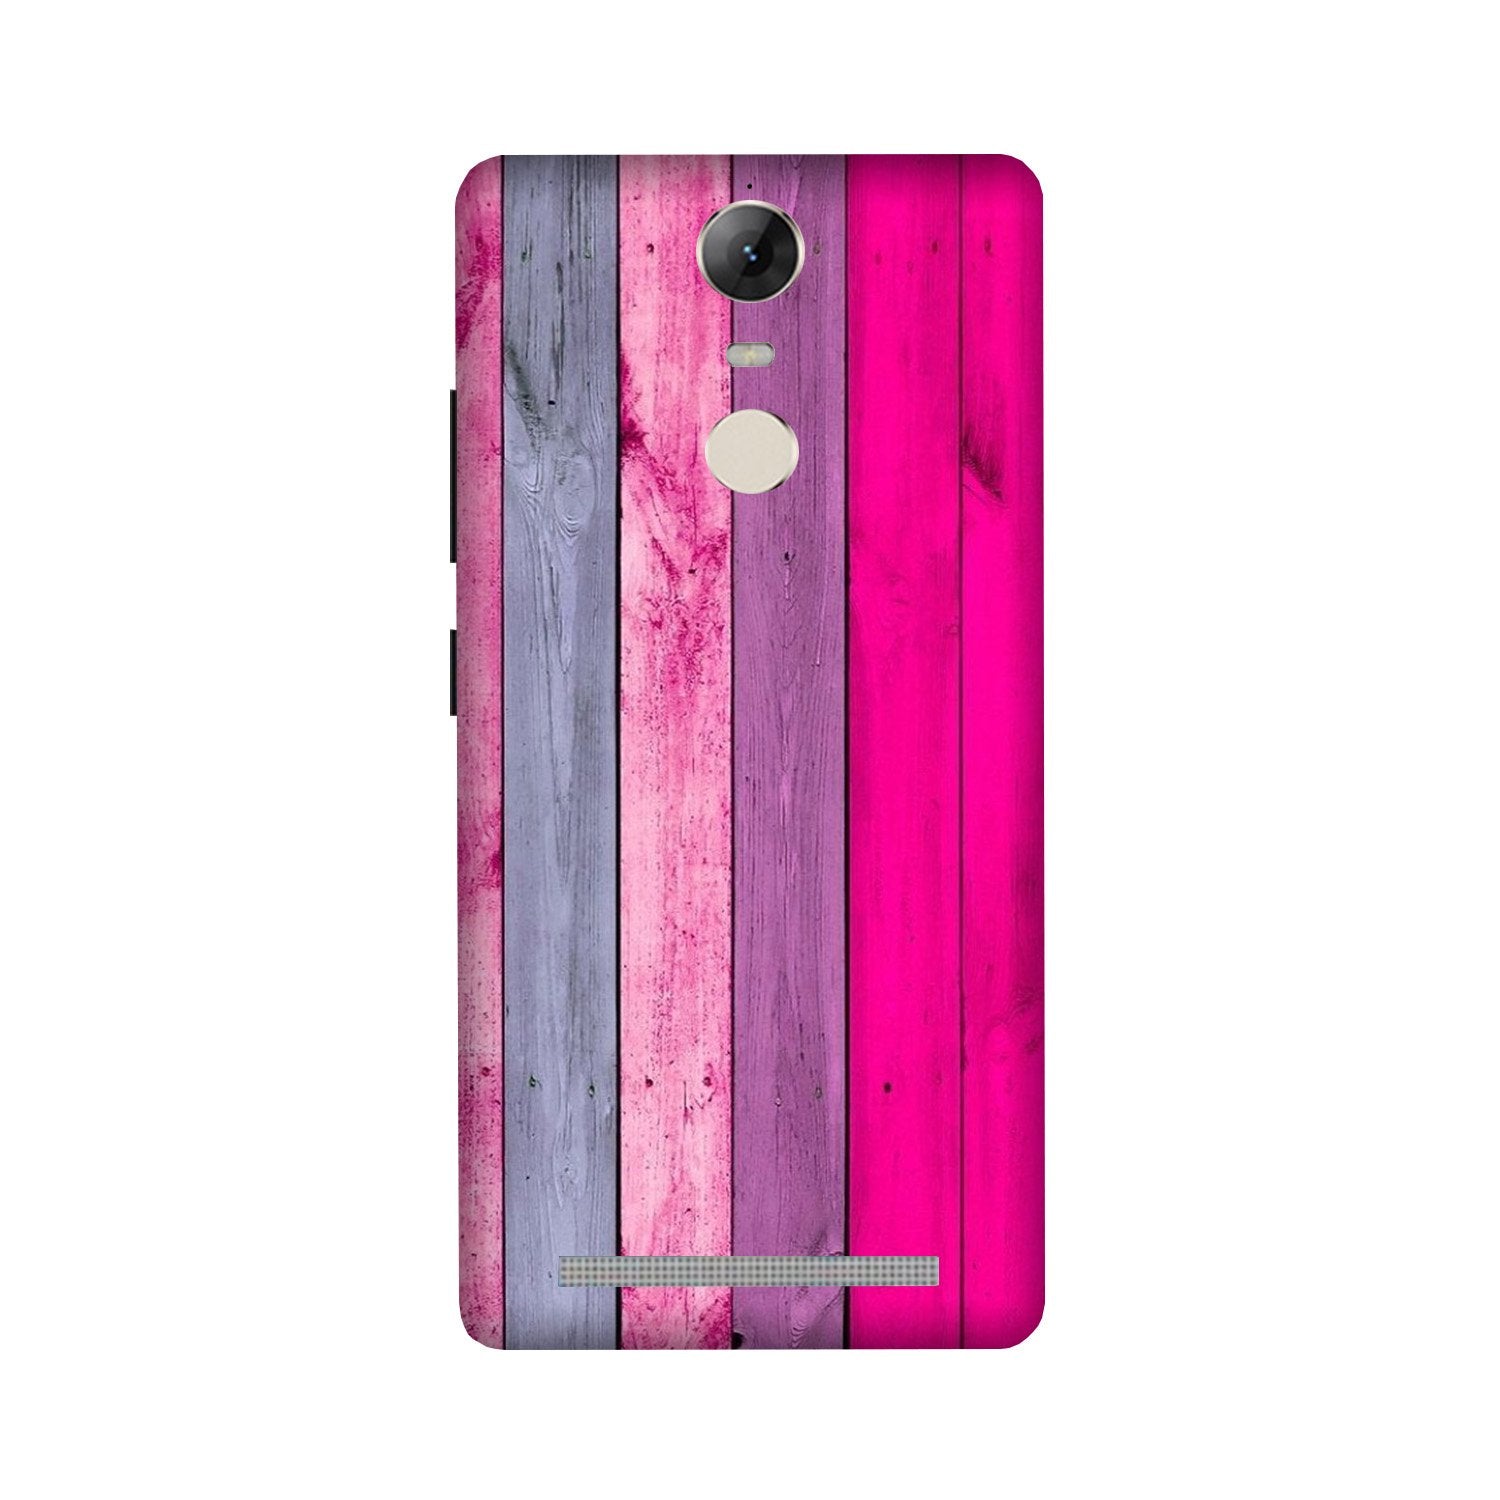 Wooden look Case for Lenovo Vibe K5 Note